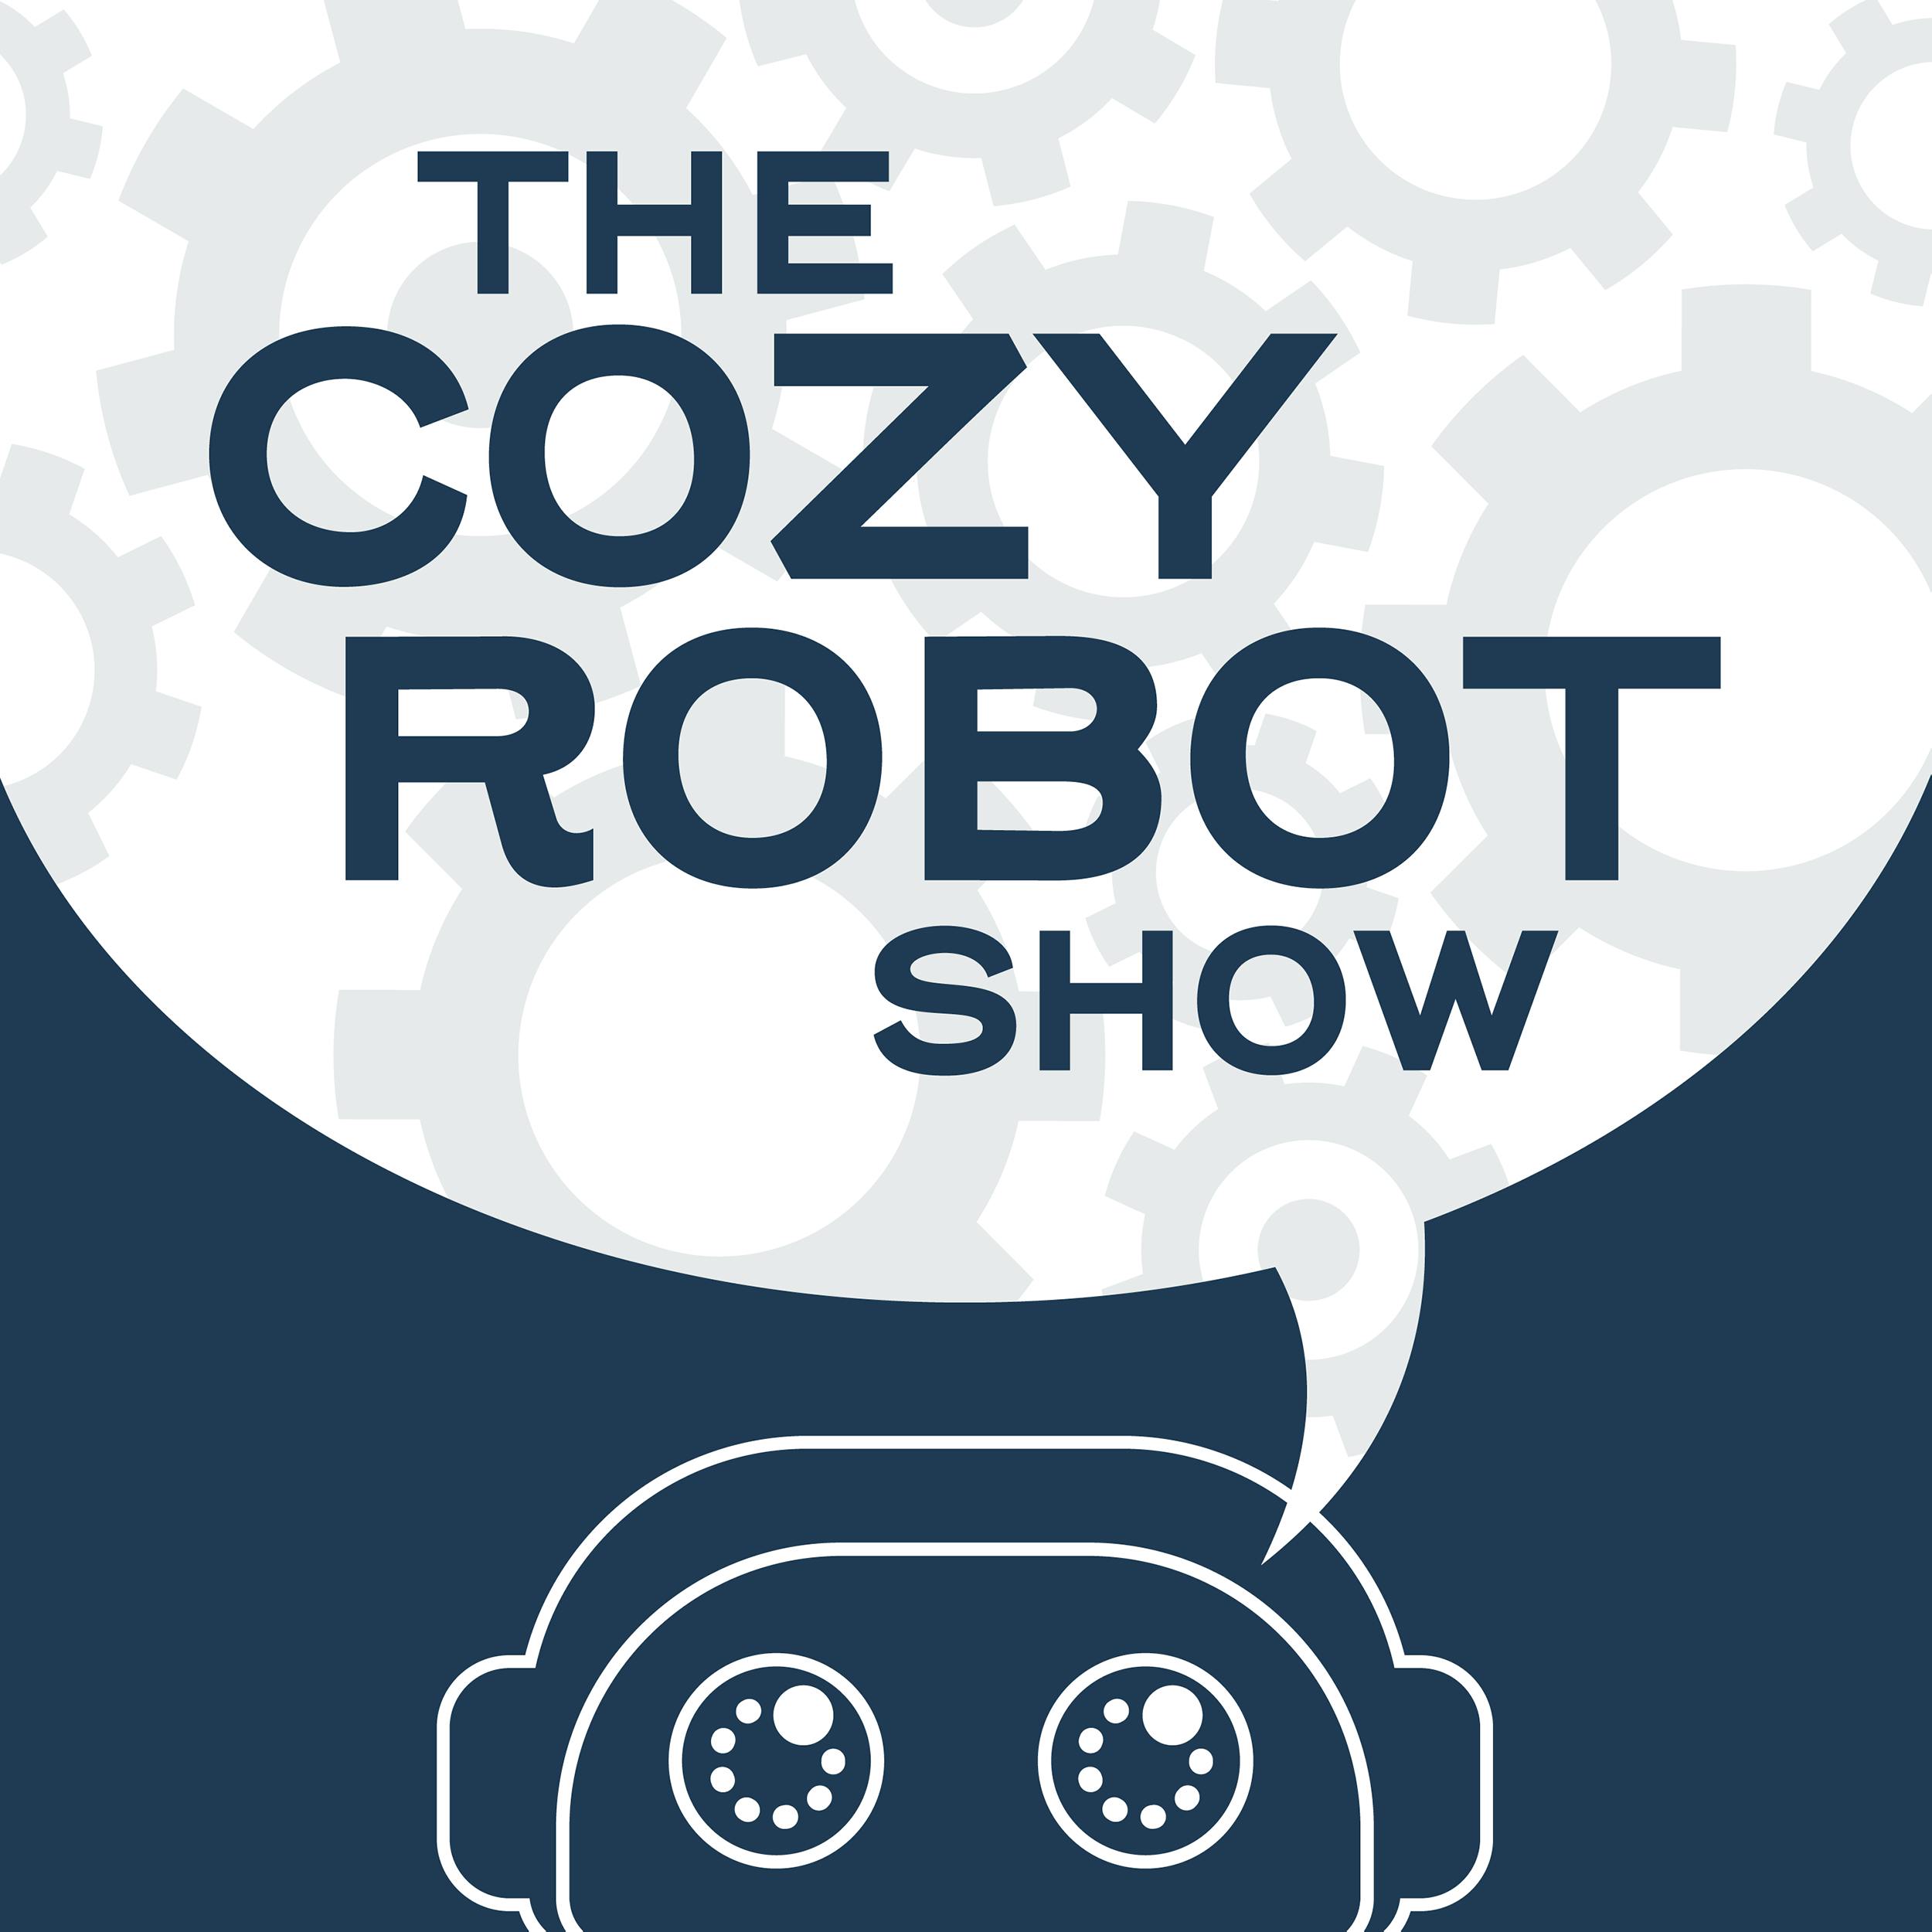 Cozy Robot Show: What If There Was No Moon? And SO Much More on the 18th Episode of The Cozy Robot Show